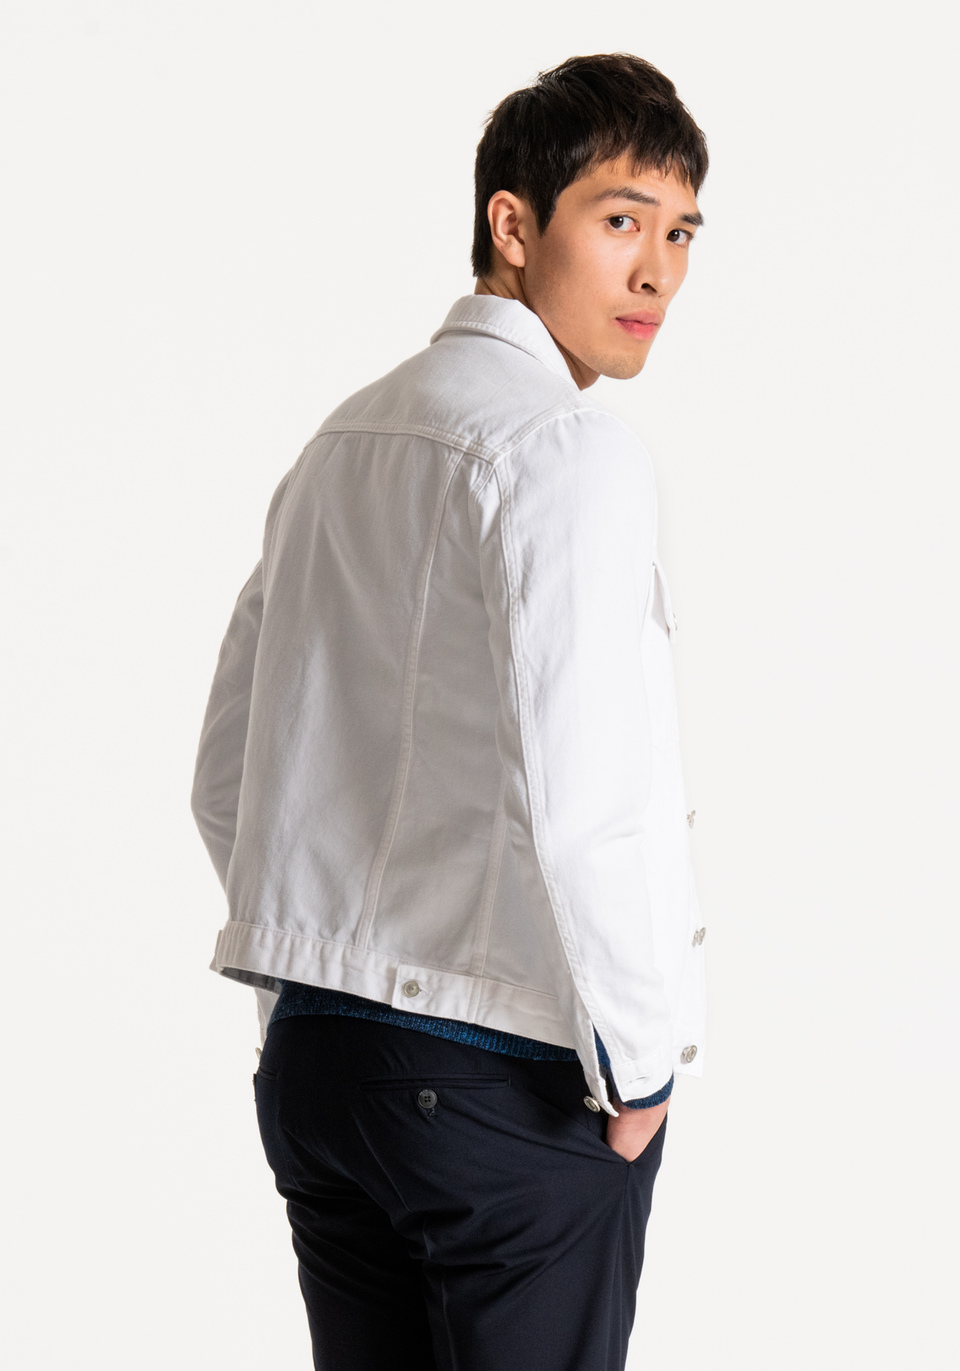 SLIM-FIT “HENDRIX” DENIM JACKET WITH EXPOSED BUTTONS - Antony Morato Online Shop